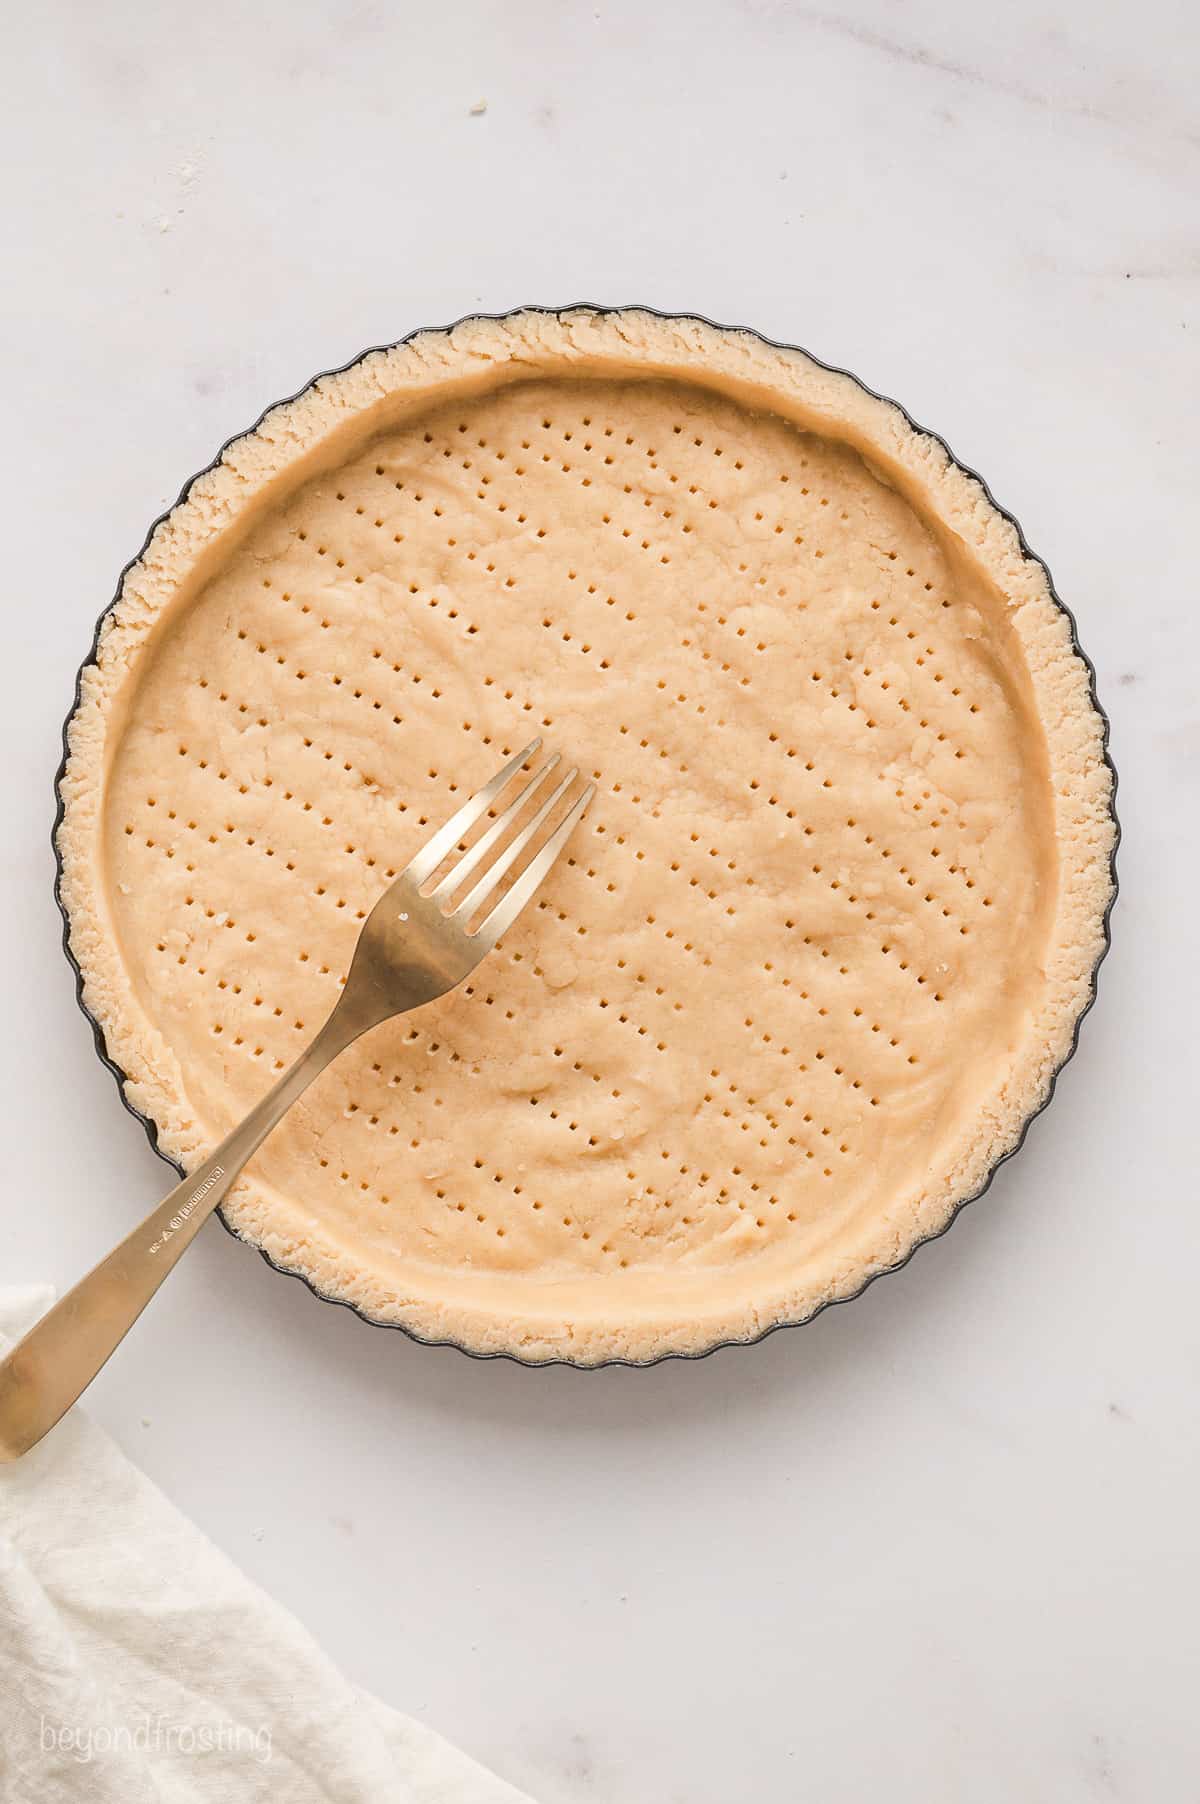 A fork is used to poke holes in the bottom of a prepared pastry shell.